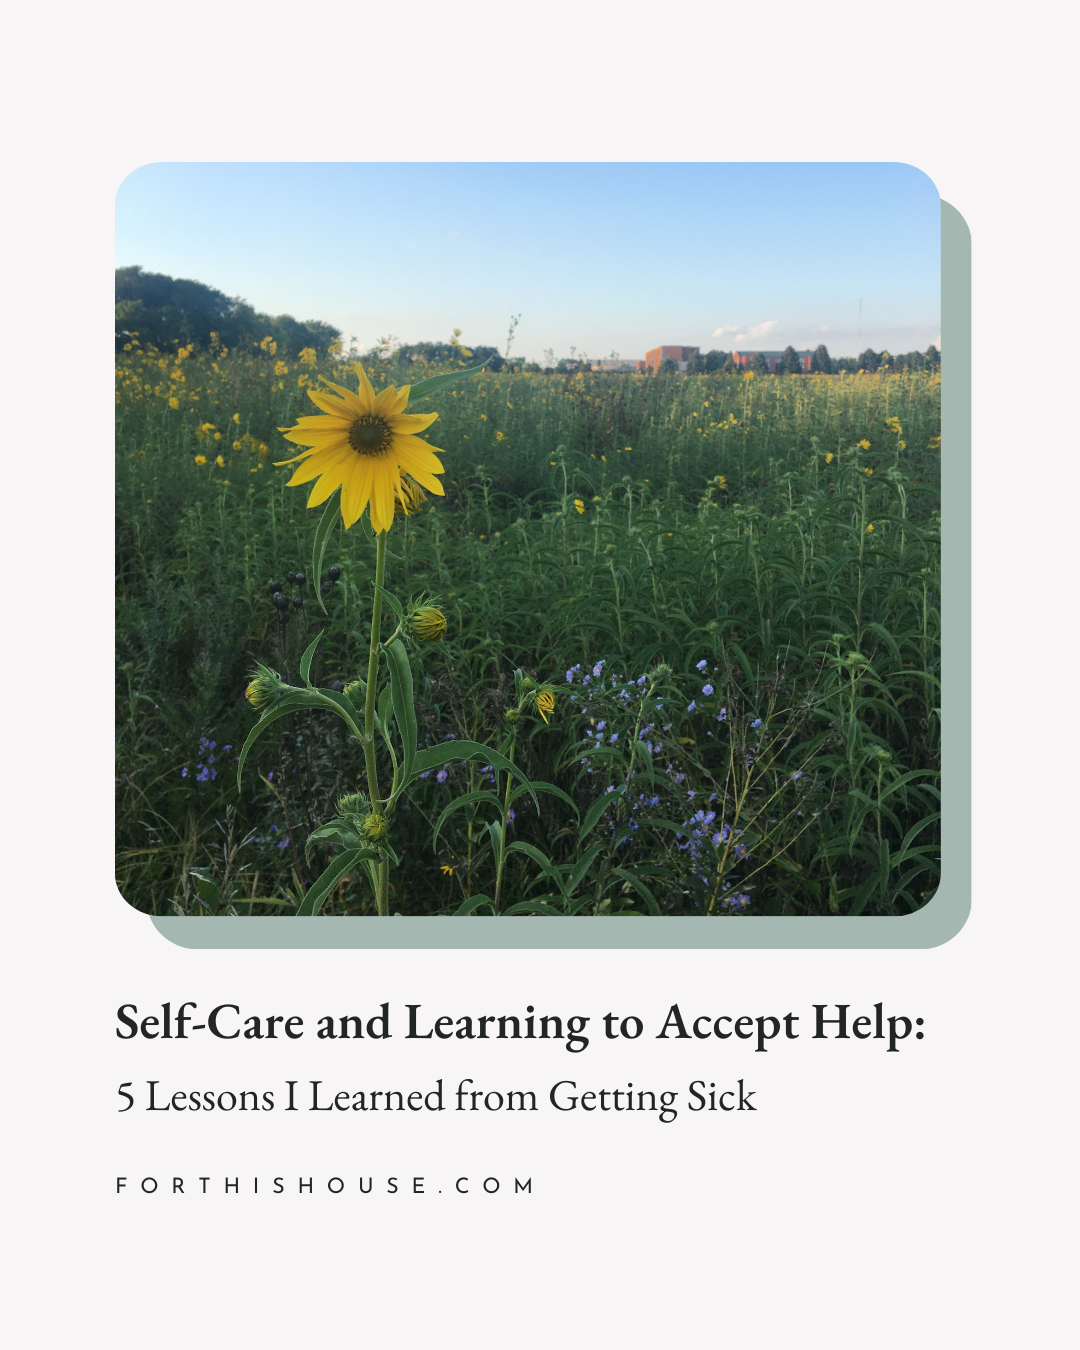 Self-Care & Learning to Accept Help